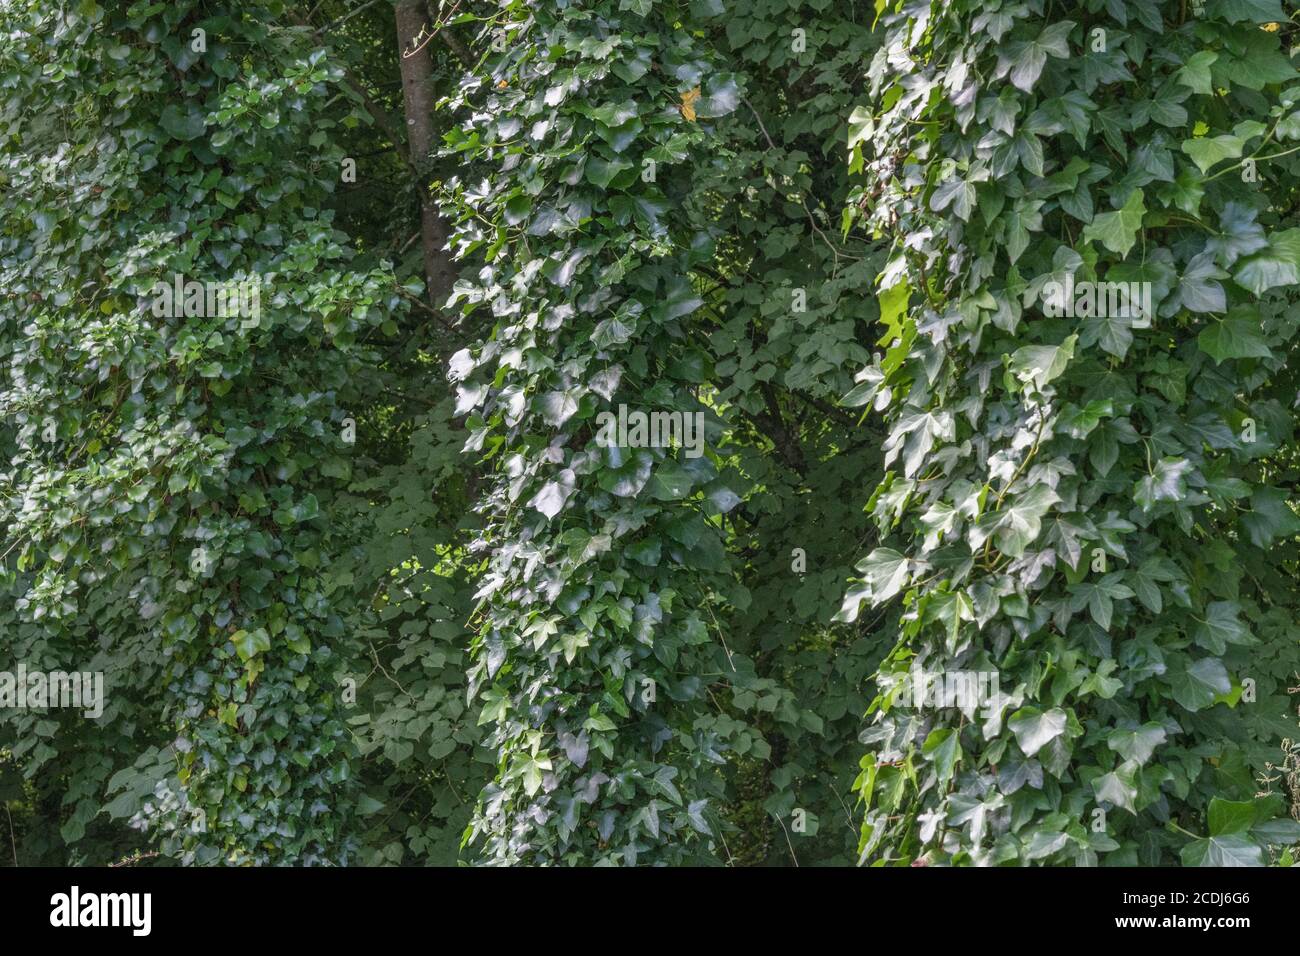 Climbing ivy, Common Ivy / Hedera helix growing up around several large tree trunks. For overgrown by ivy, Hedera helix on tree, medicinal plants. Stock Photo